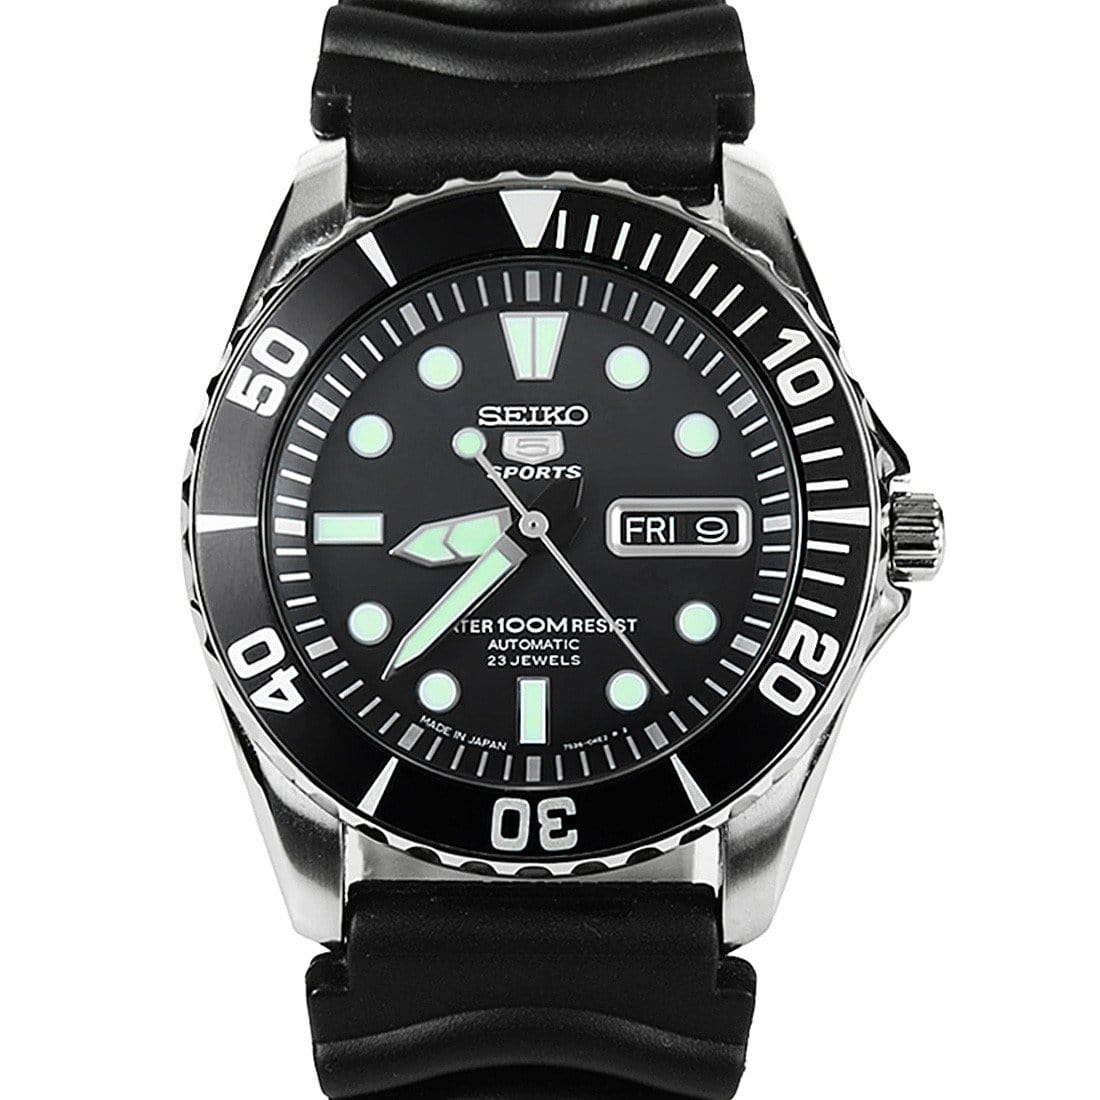 Seiko 5 Sports Diving Watch SNZF17J2 SNZF17 with EXTRA BRACELET